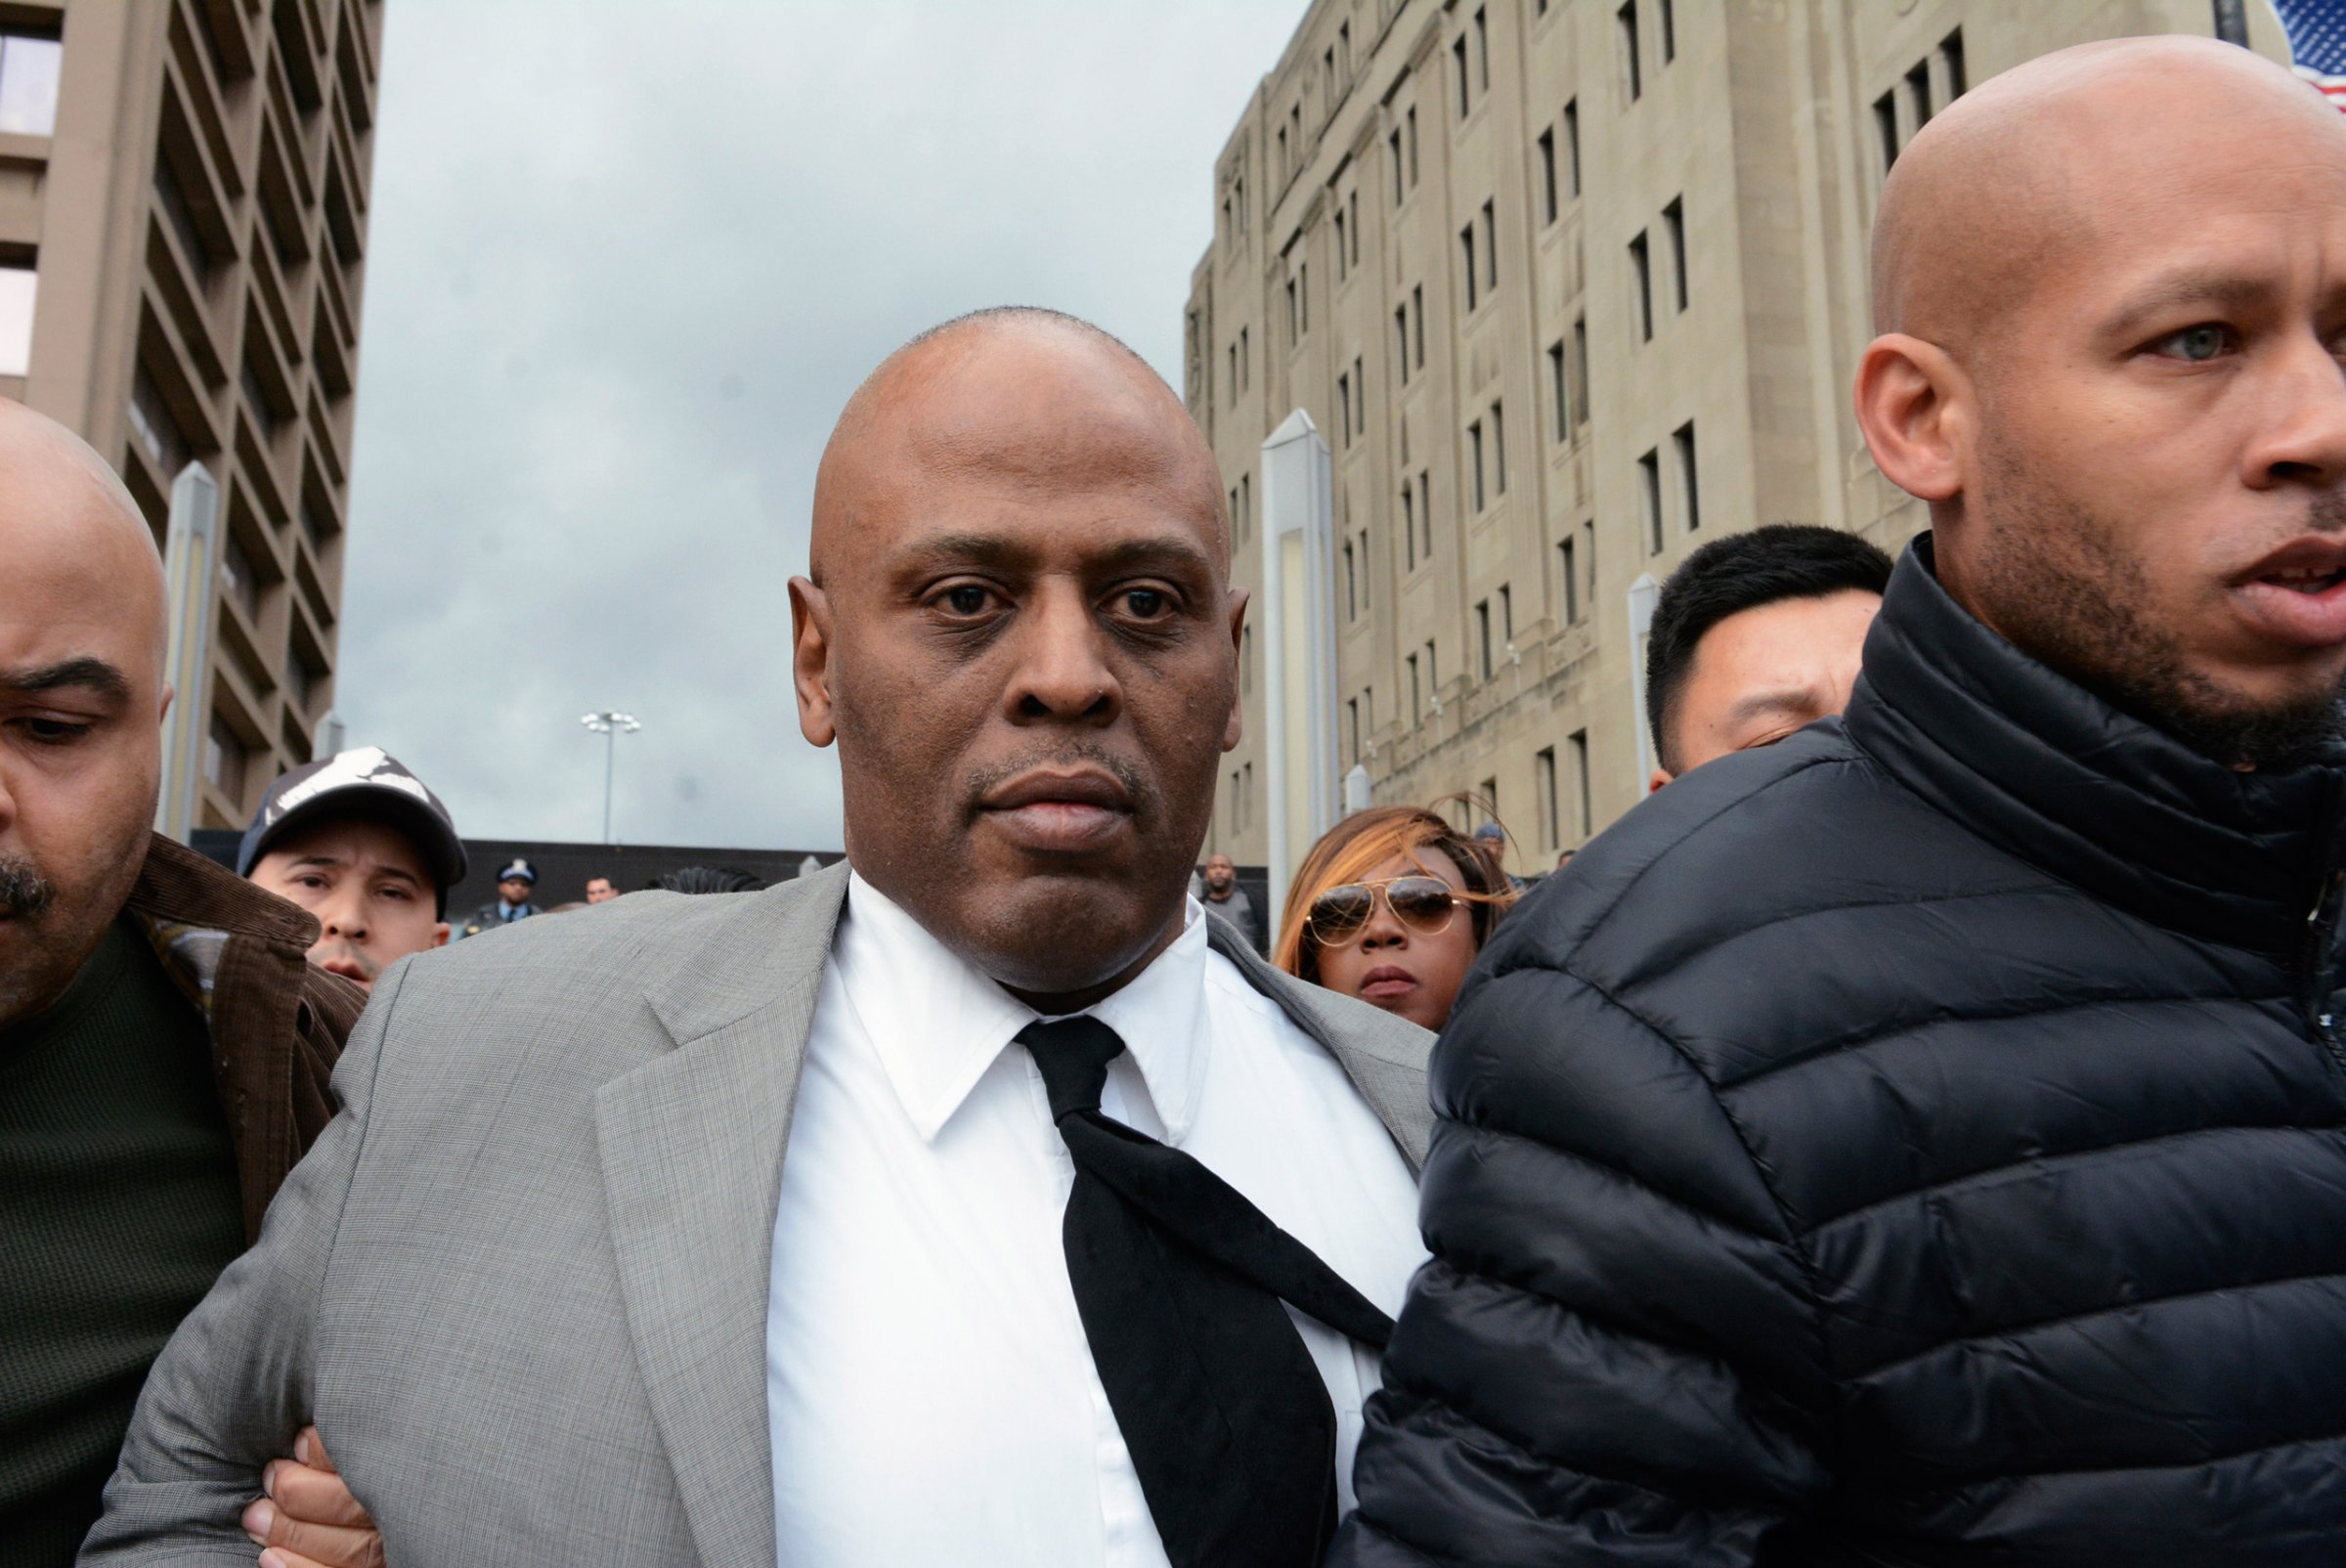 Chicago Police Commander Glenn Evans, who was accused of shoving his gun down a suspect's throat and pressing a stun gun to the man's groin in 2013, leaves the Criminal Courts Building in Chicago on Dec. 14, 2015.